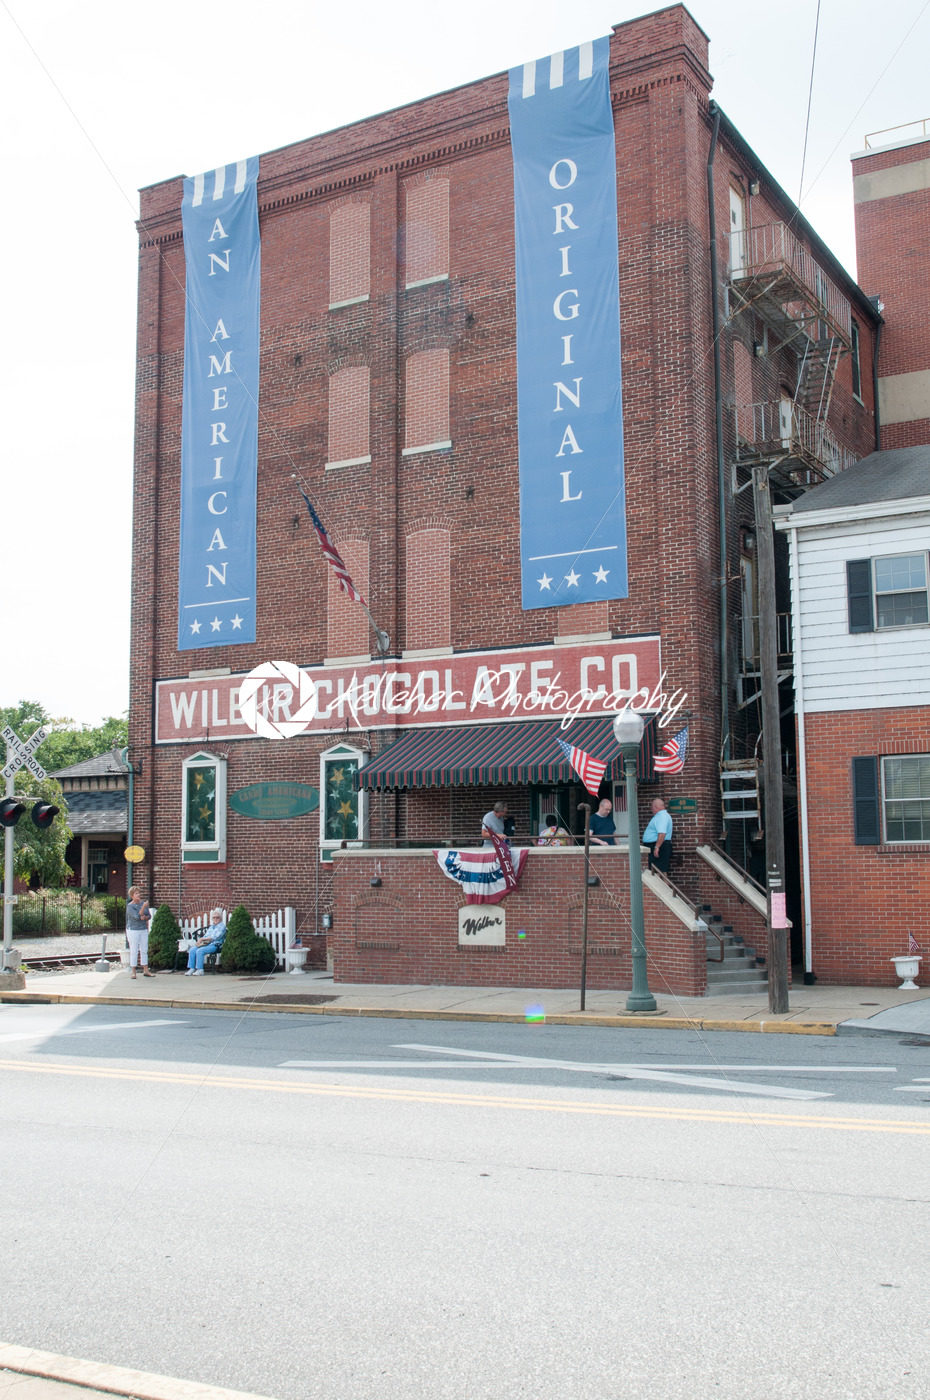 LITITZ, PA – AUGUST 30: The famed Wilbur Chocolate Company headquarters on Route 501 in Lititz on August 30, 2014 - Kelleher Photography Store